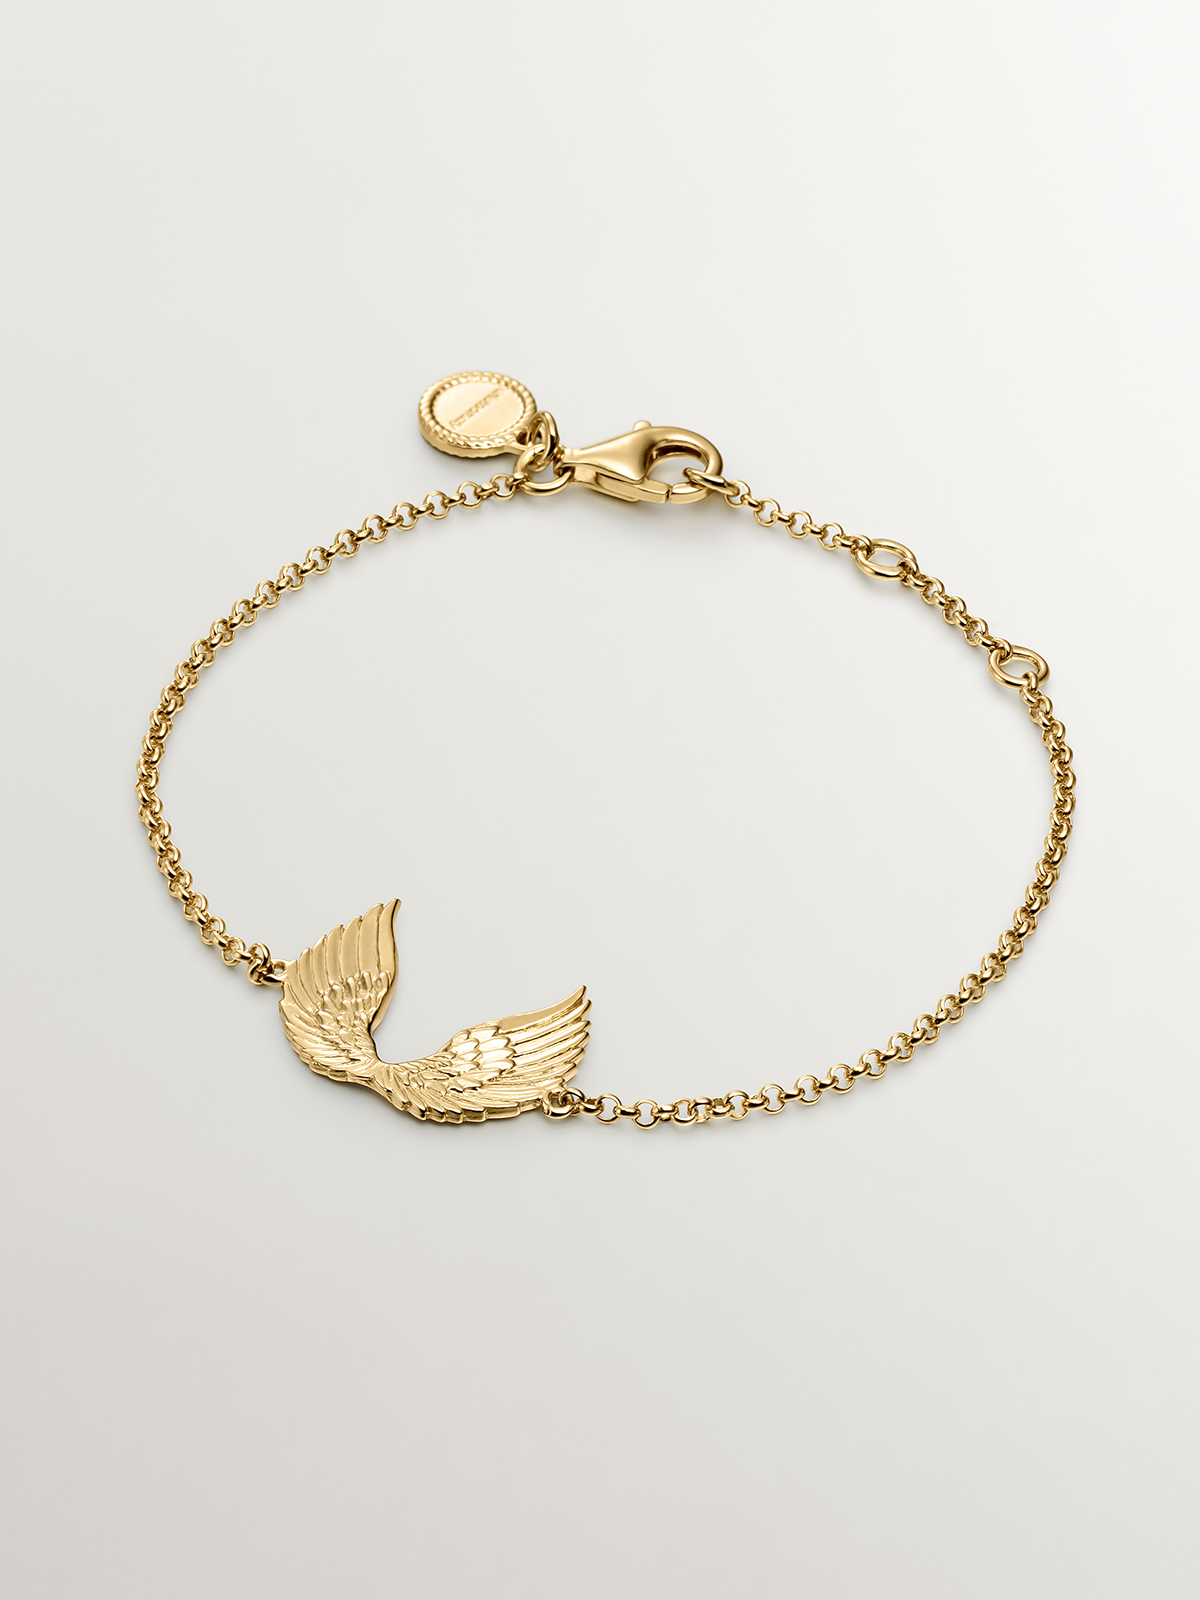 925 Silver bracelet plated in 18K yellow gold with wings